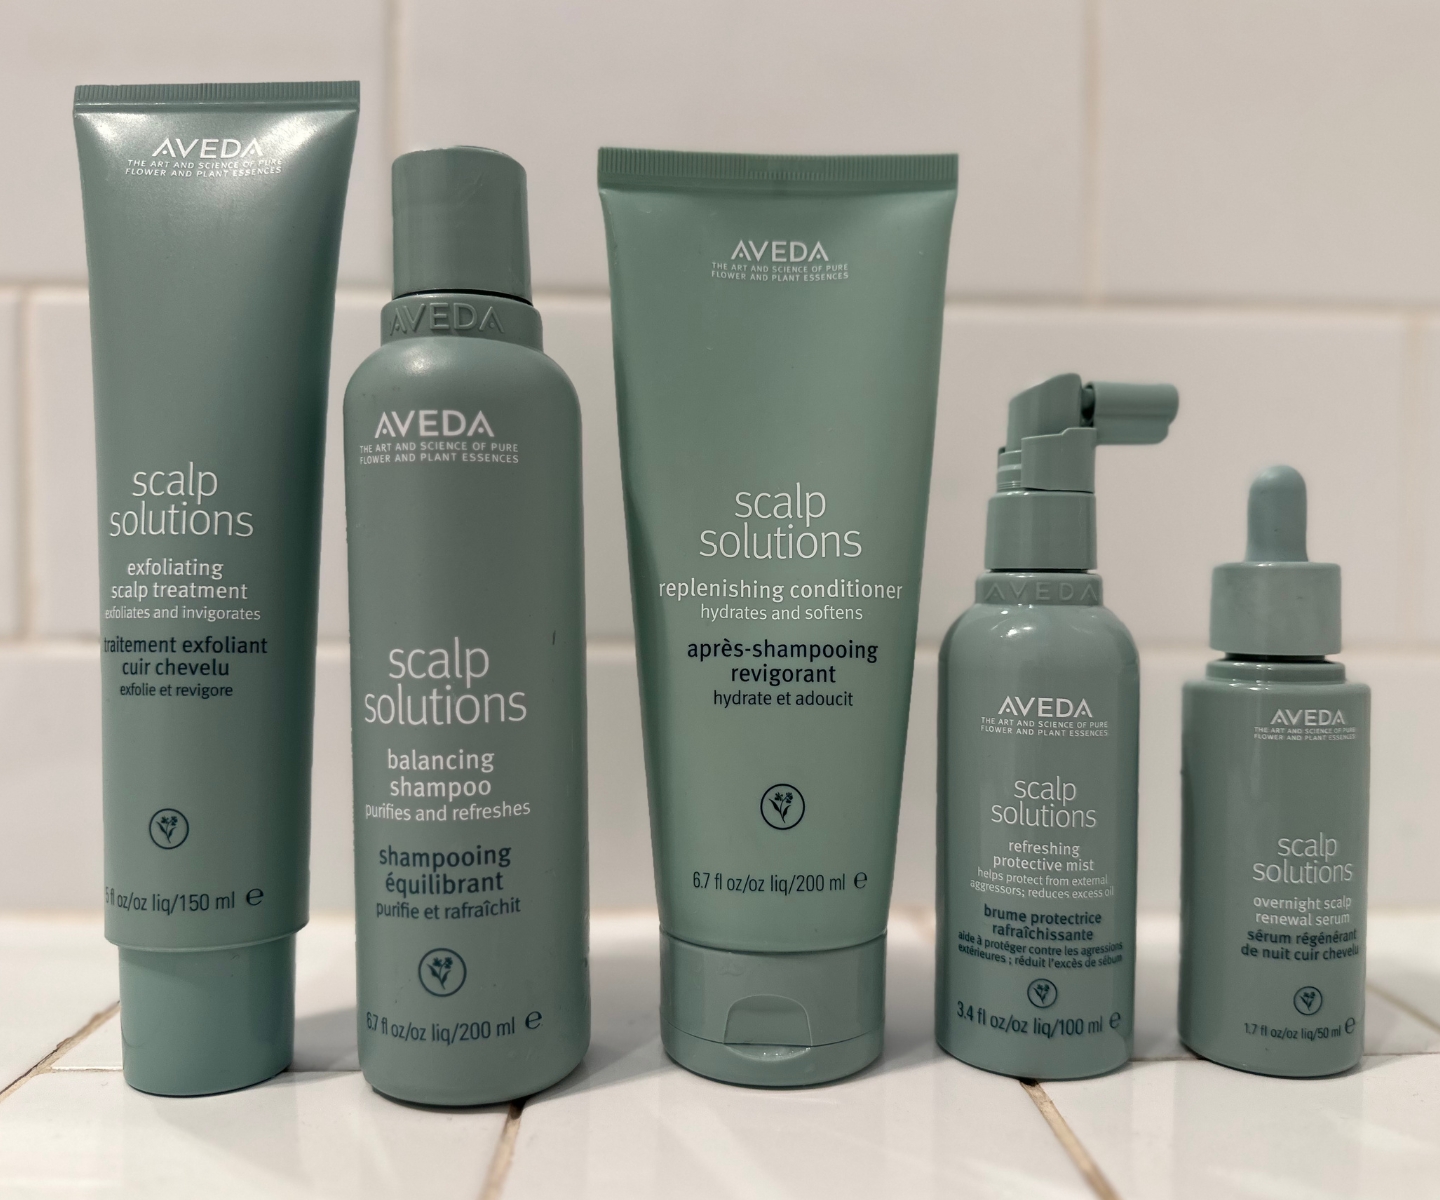 Aveda Scalp Solutions collection pic